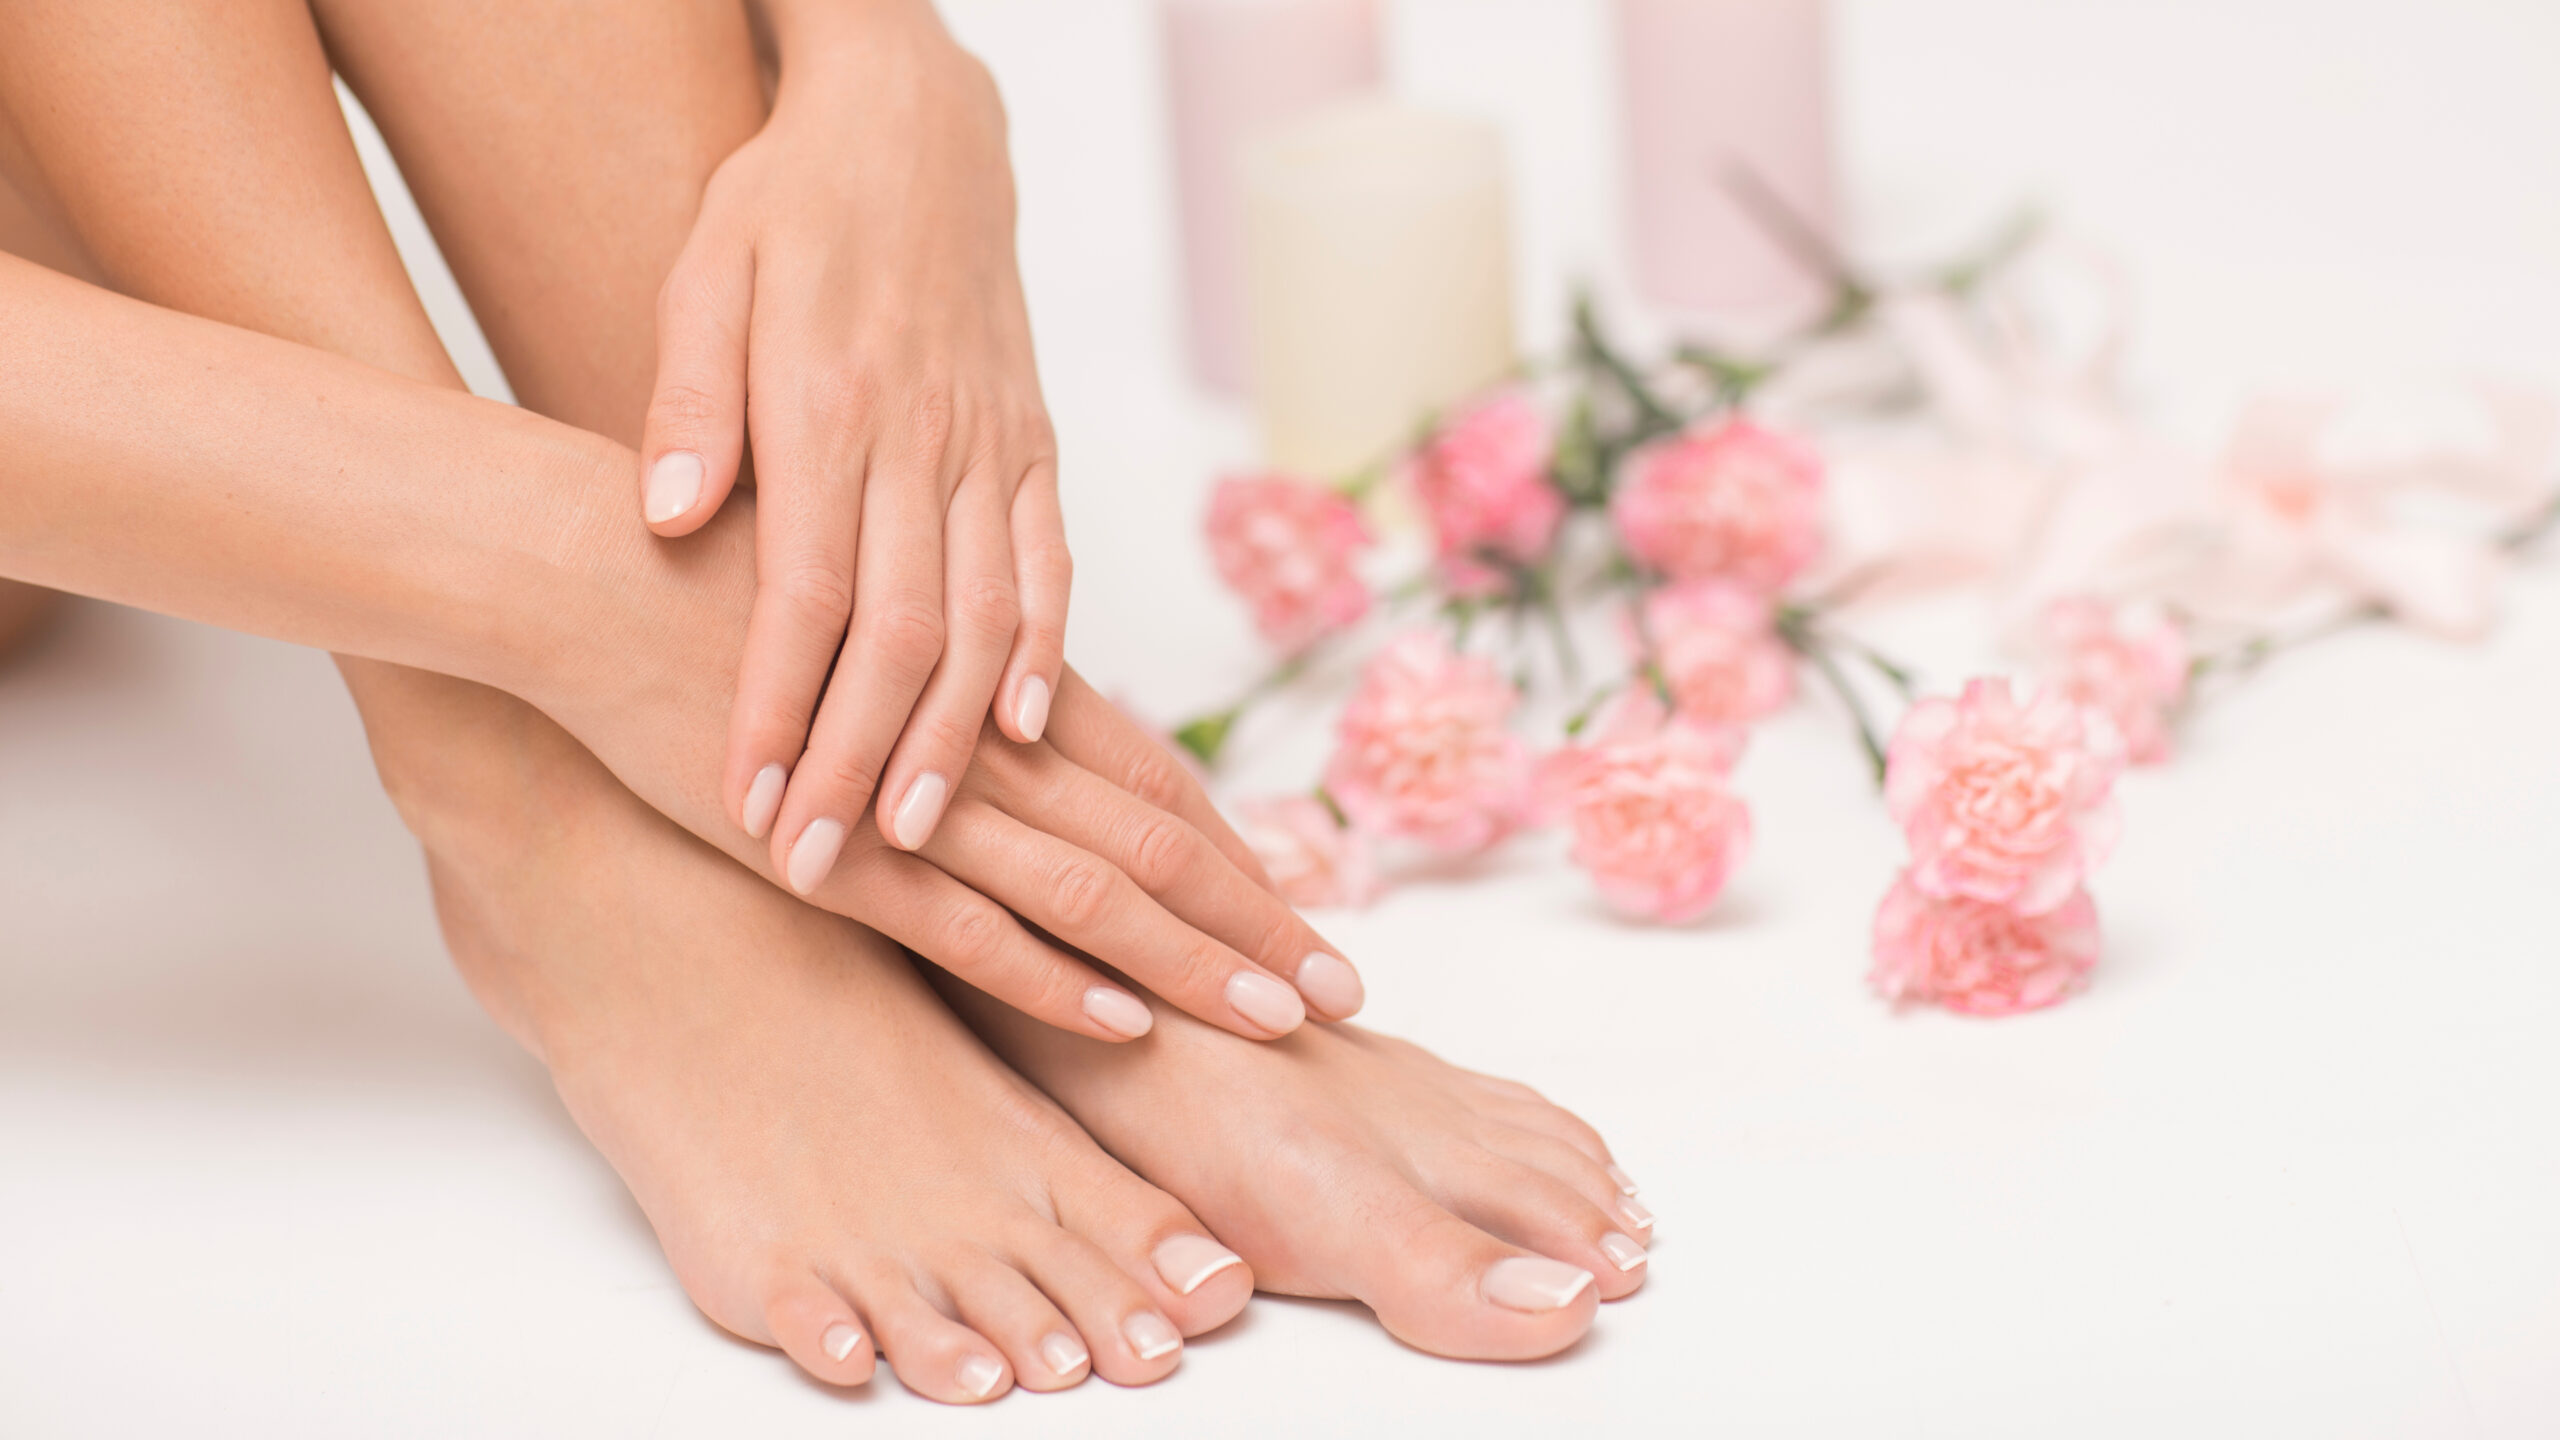 hand and foot care